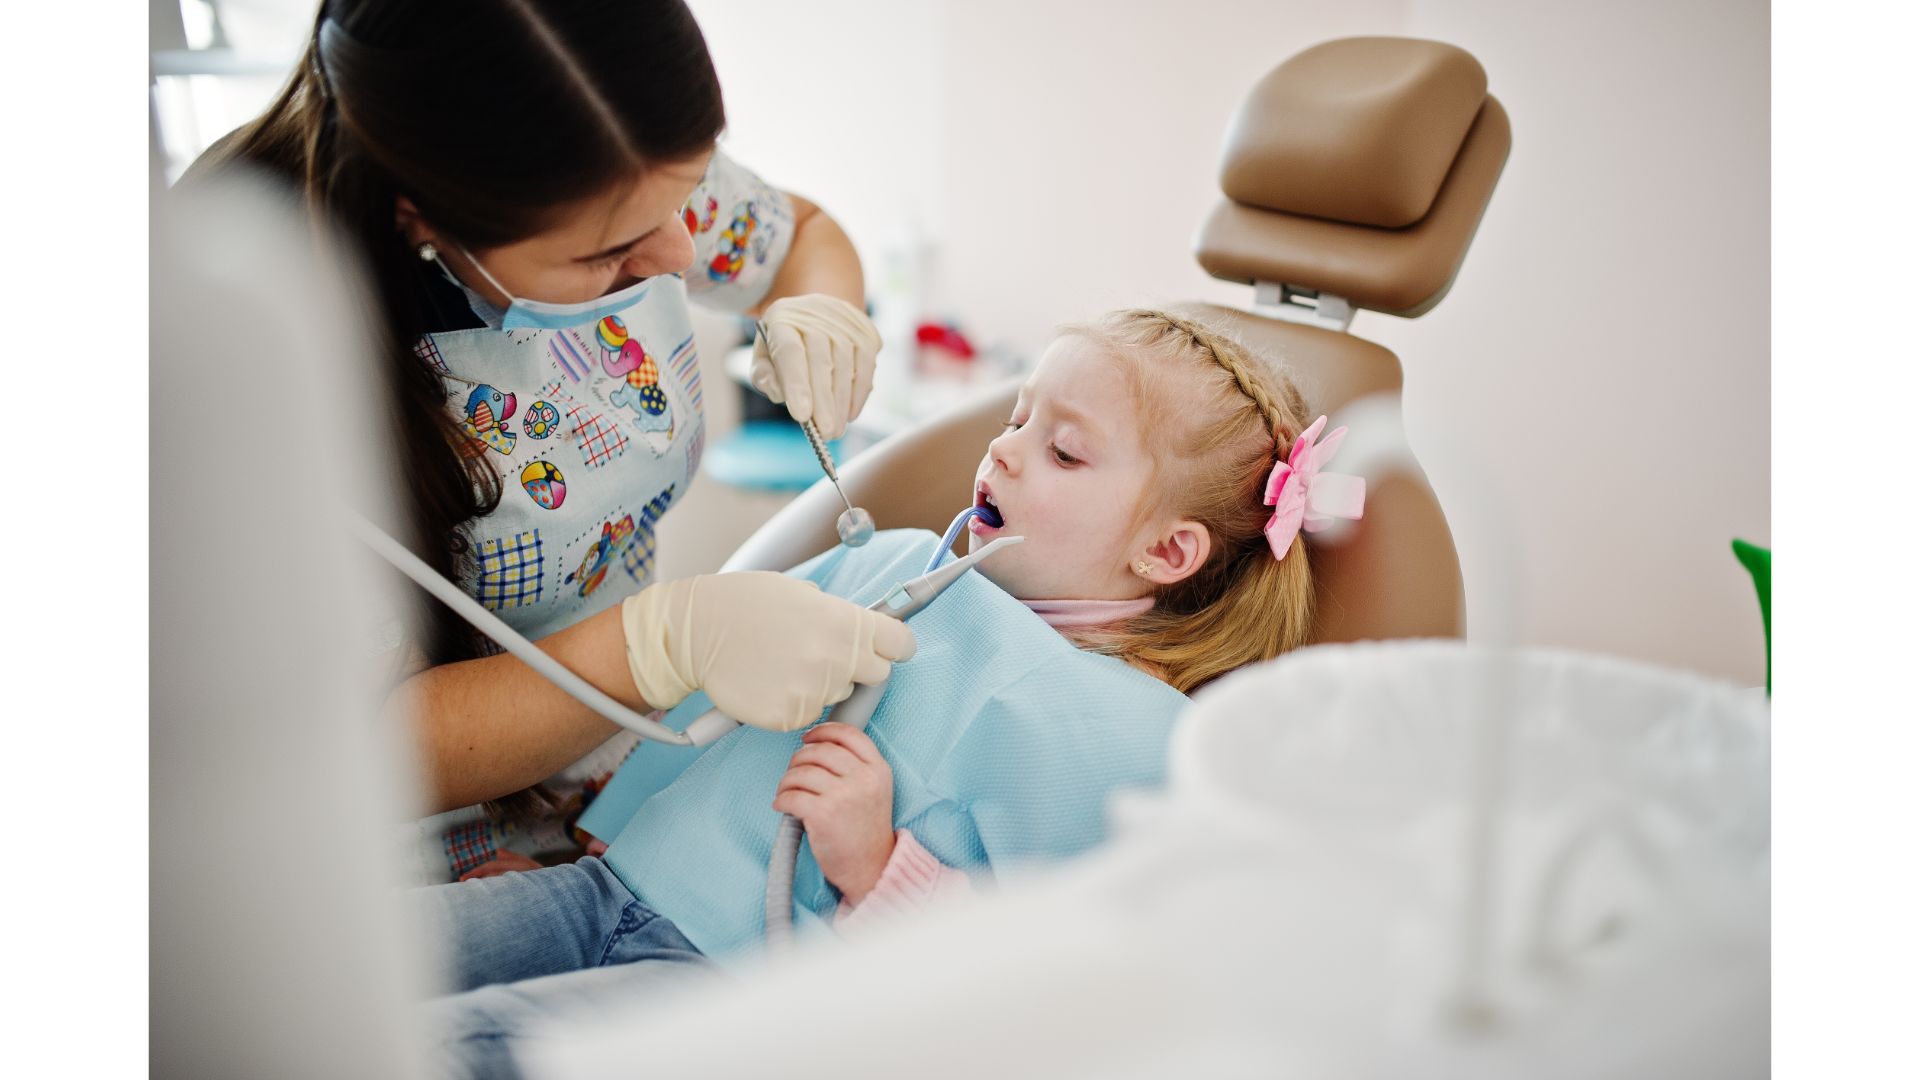 A dental professional examines a young child.